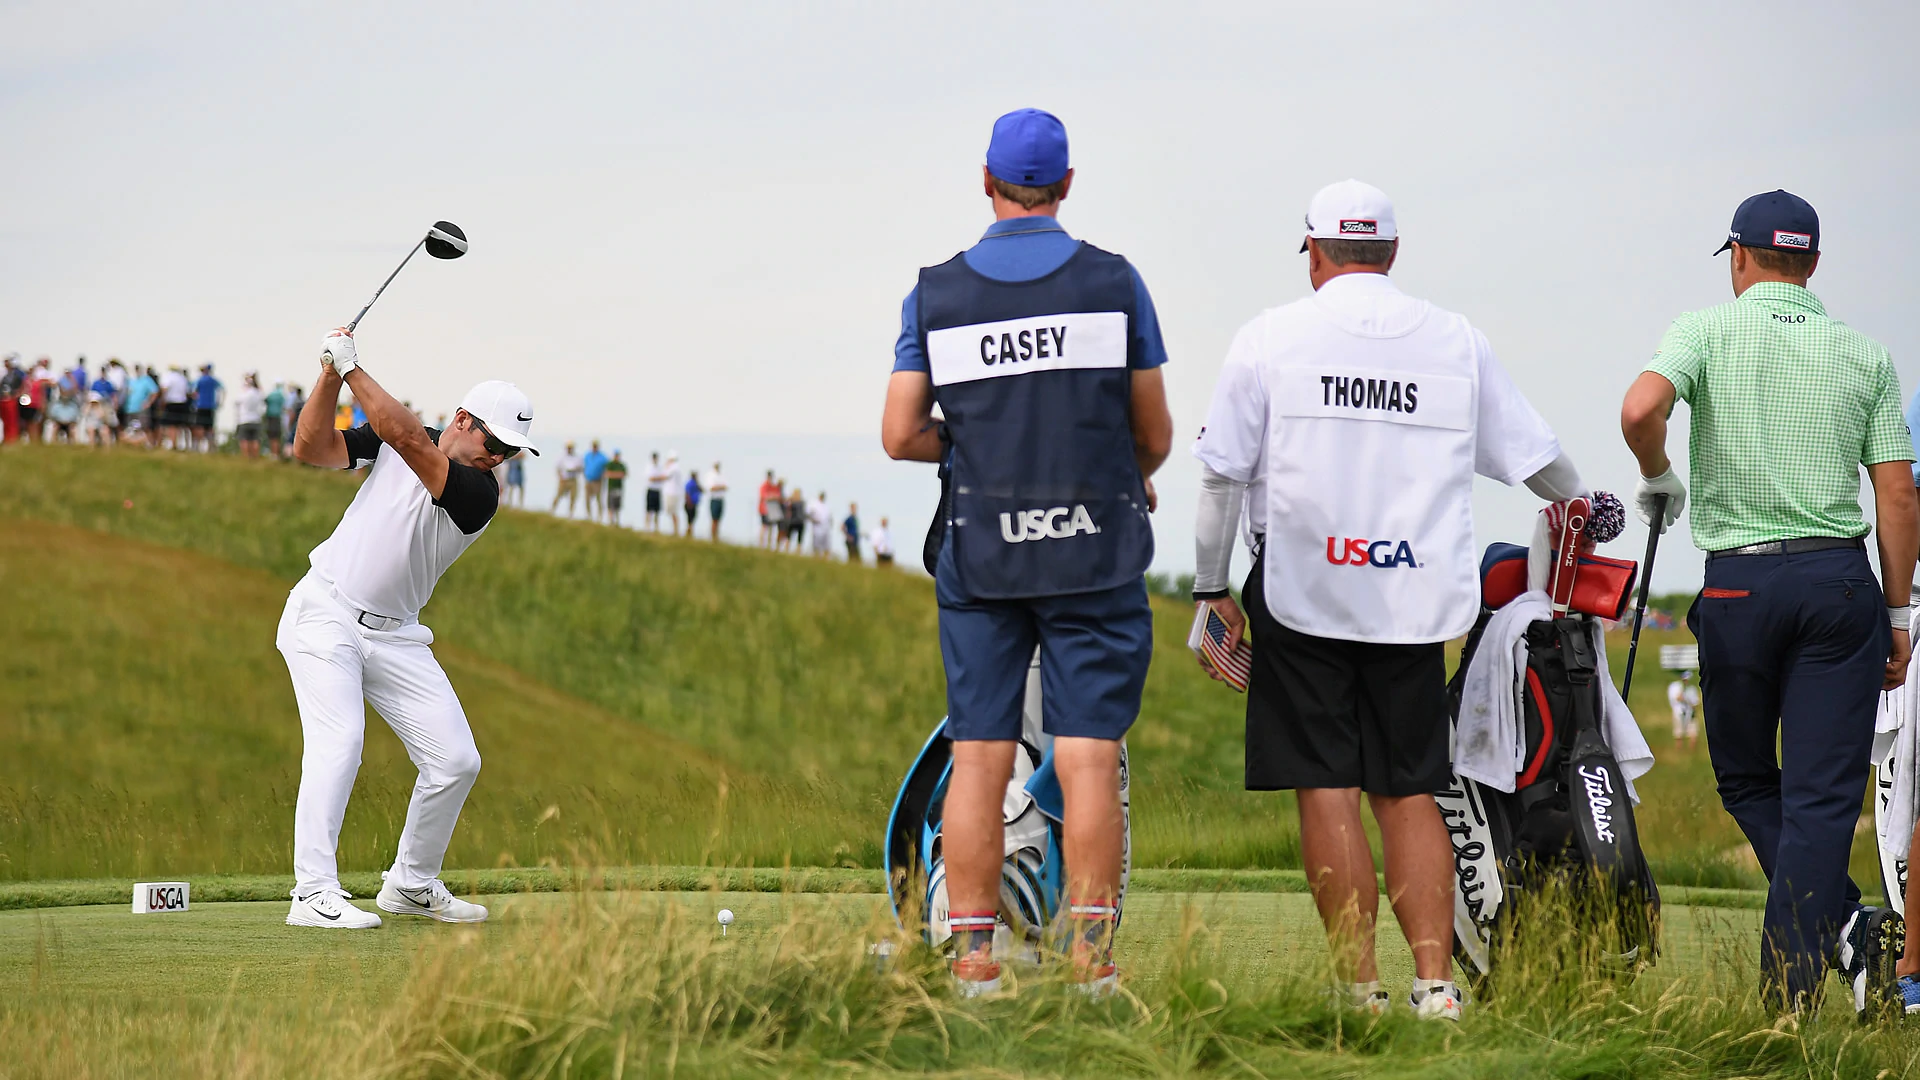 Third-round tee times at the 117th U.S. Open